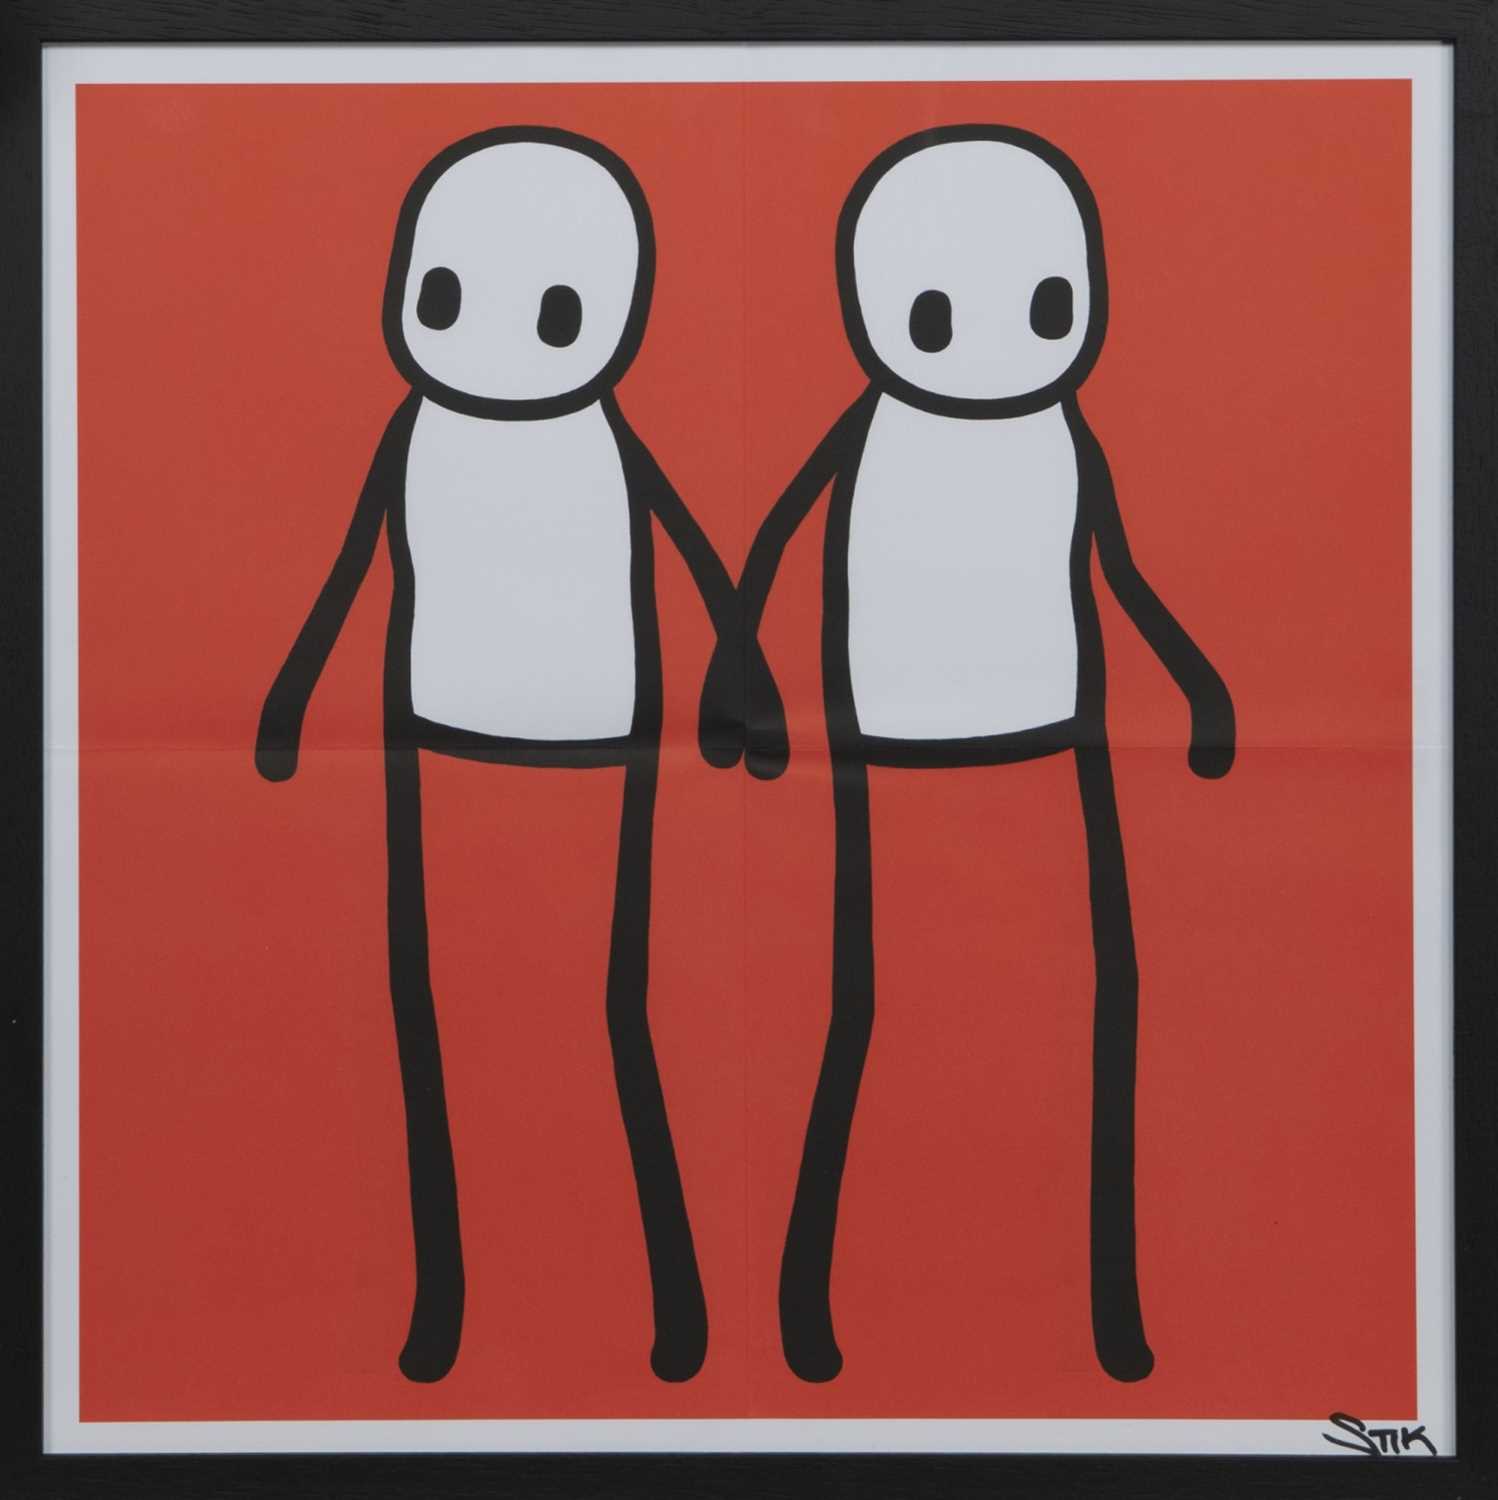 HOLDING HANDS (RED, ORANGE, YELLOW, BLUE & TEAL), LITHOGRAPHS BY STIK